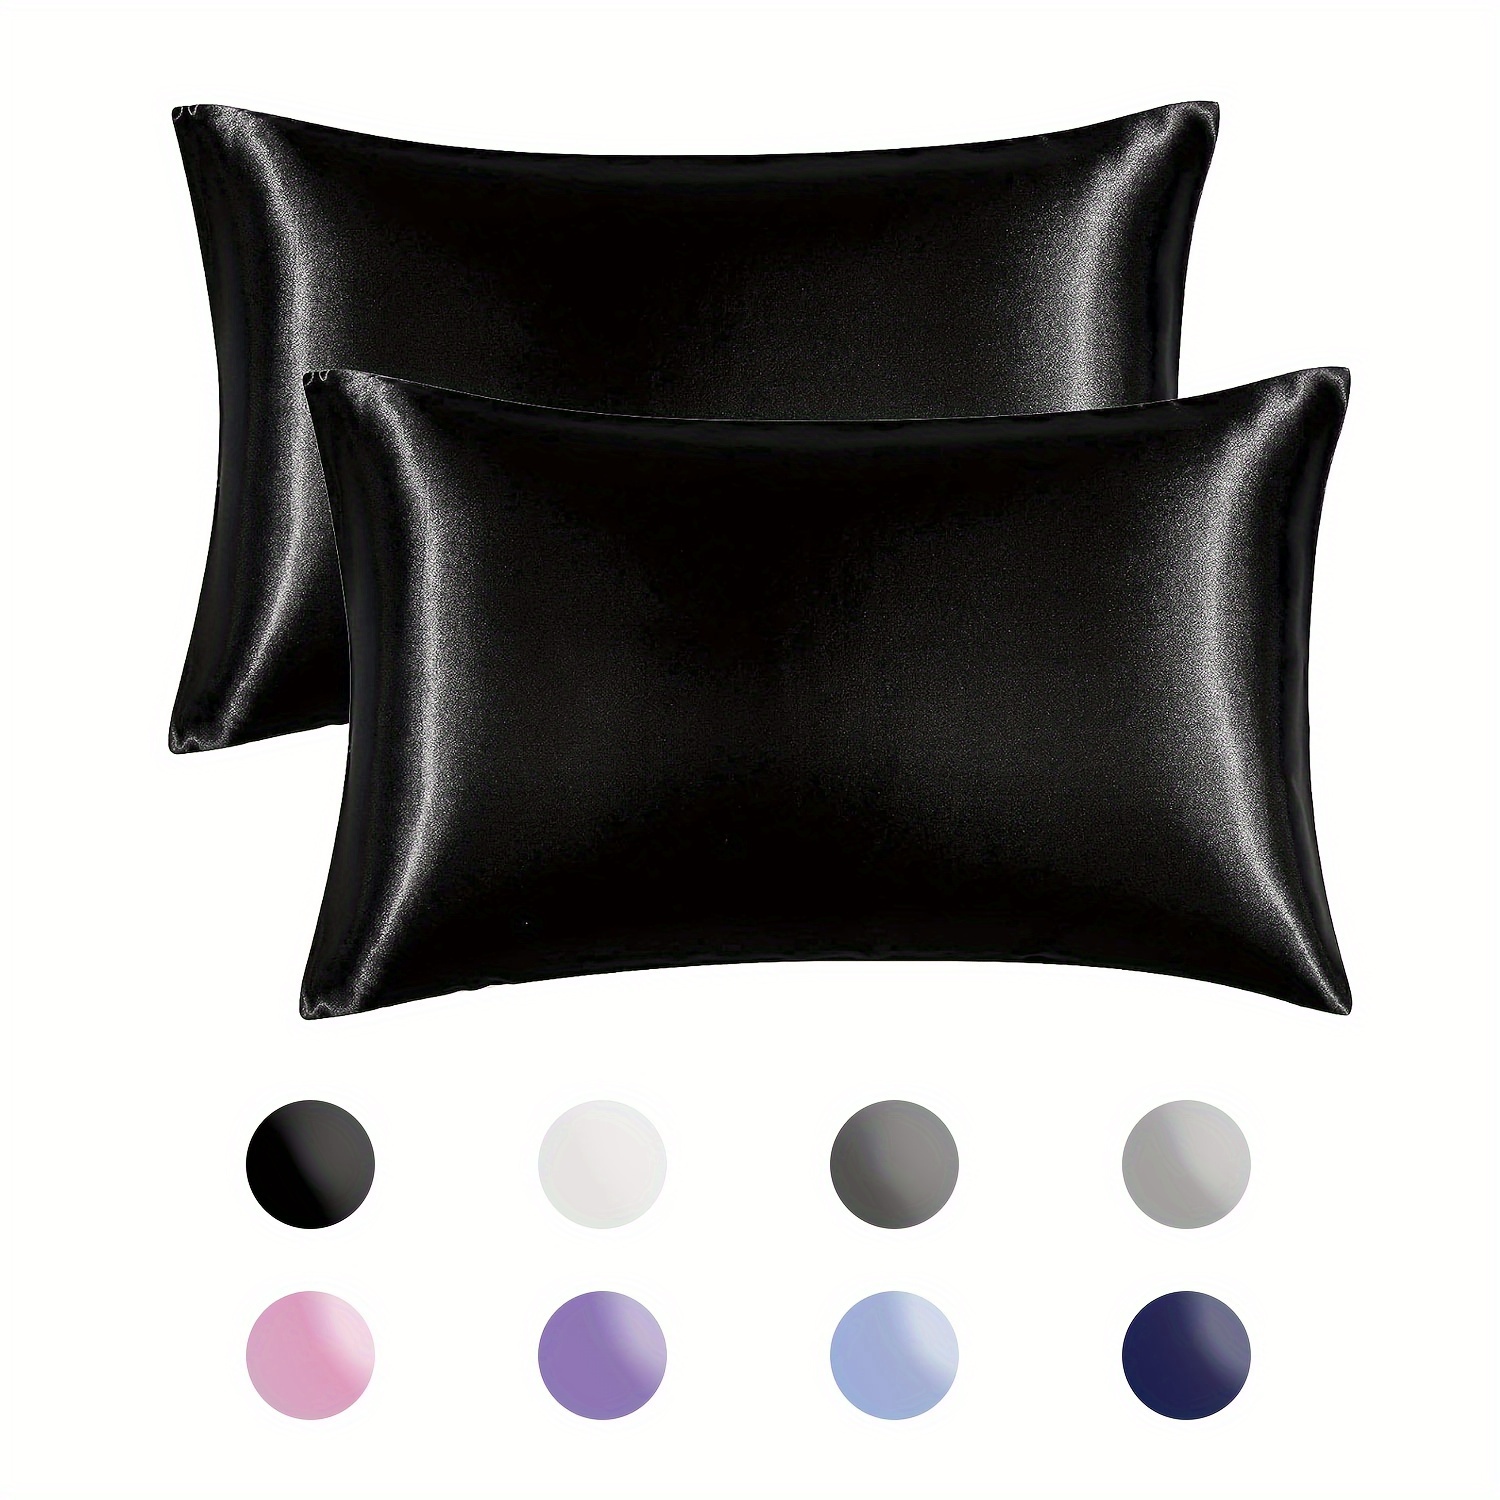 

2pcs Satin Pillowcase, Soft And Smooth Texture, Satin Solid Color Envelope Pillowcases, Reduce Hair Breakage block Wrinkles